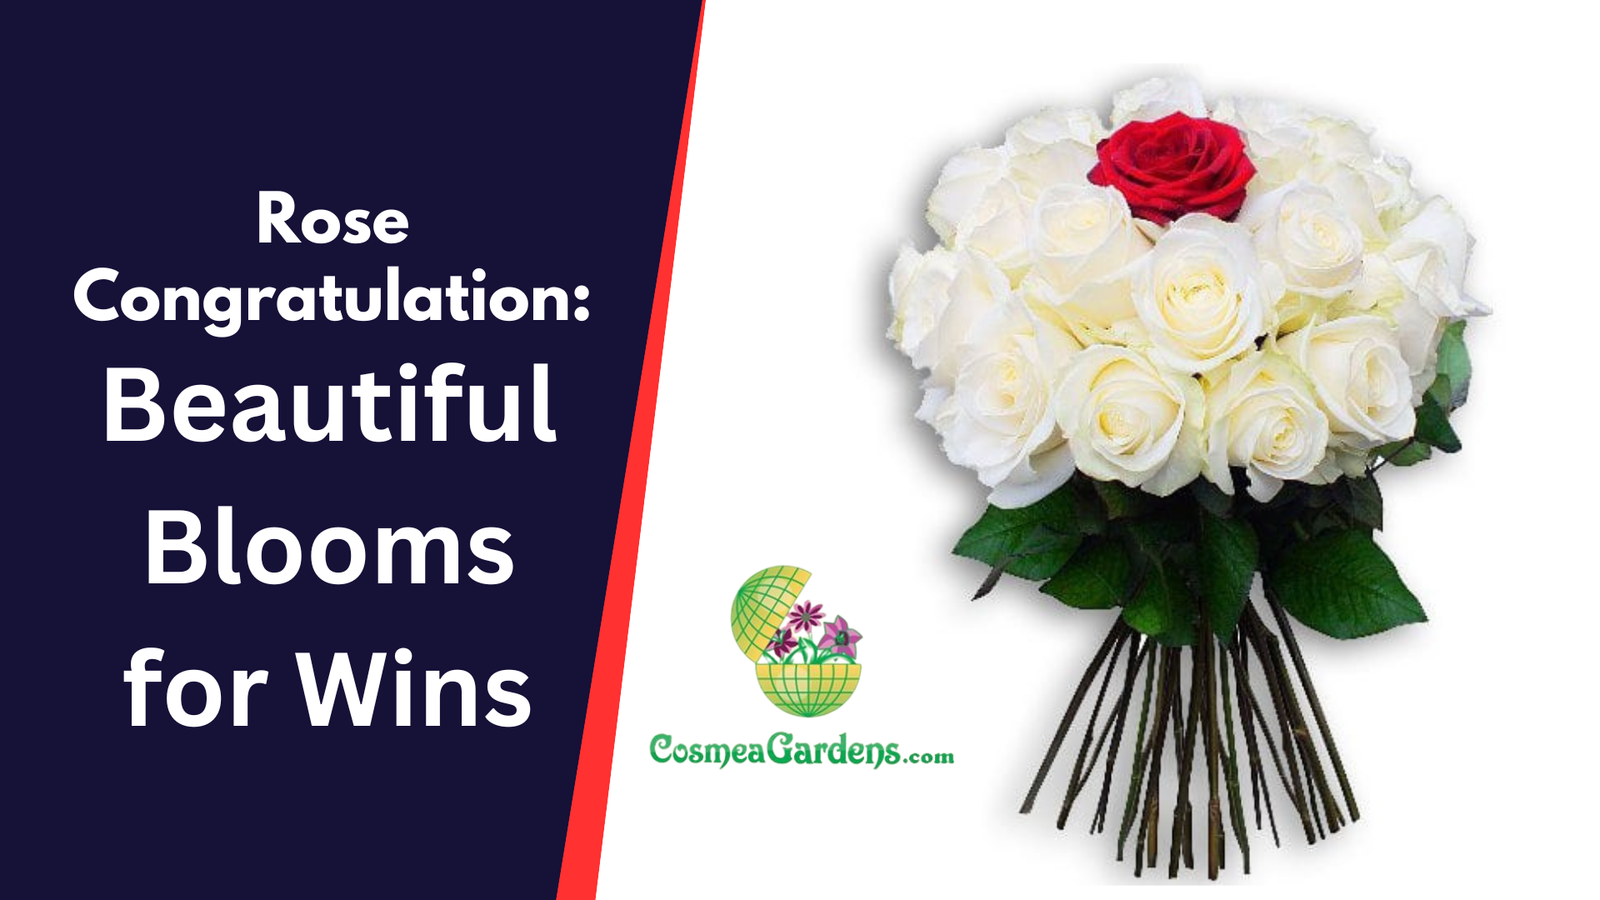 Rose Congratulations: Beautiful Blooms for Wins